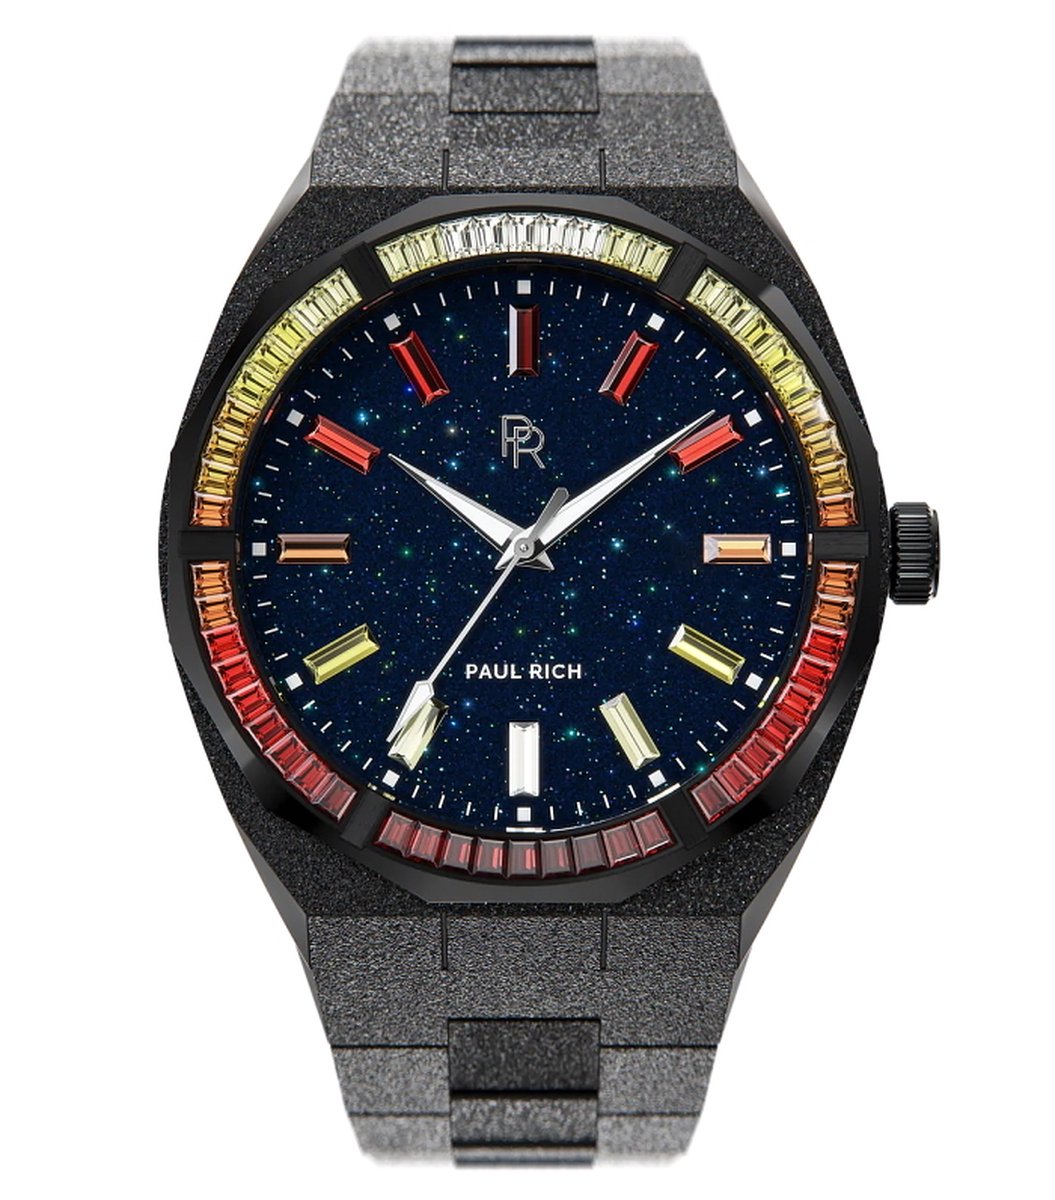 Paul Rich Frosted Midnight Sun Black MS02 horloge 45 mm